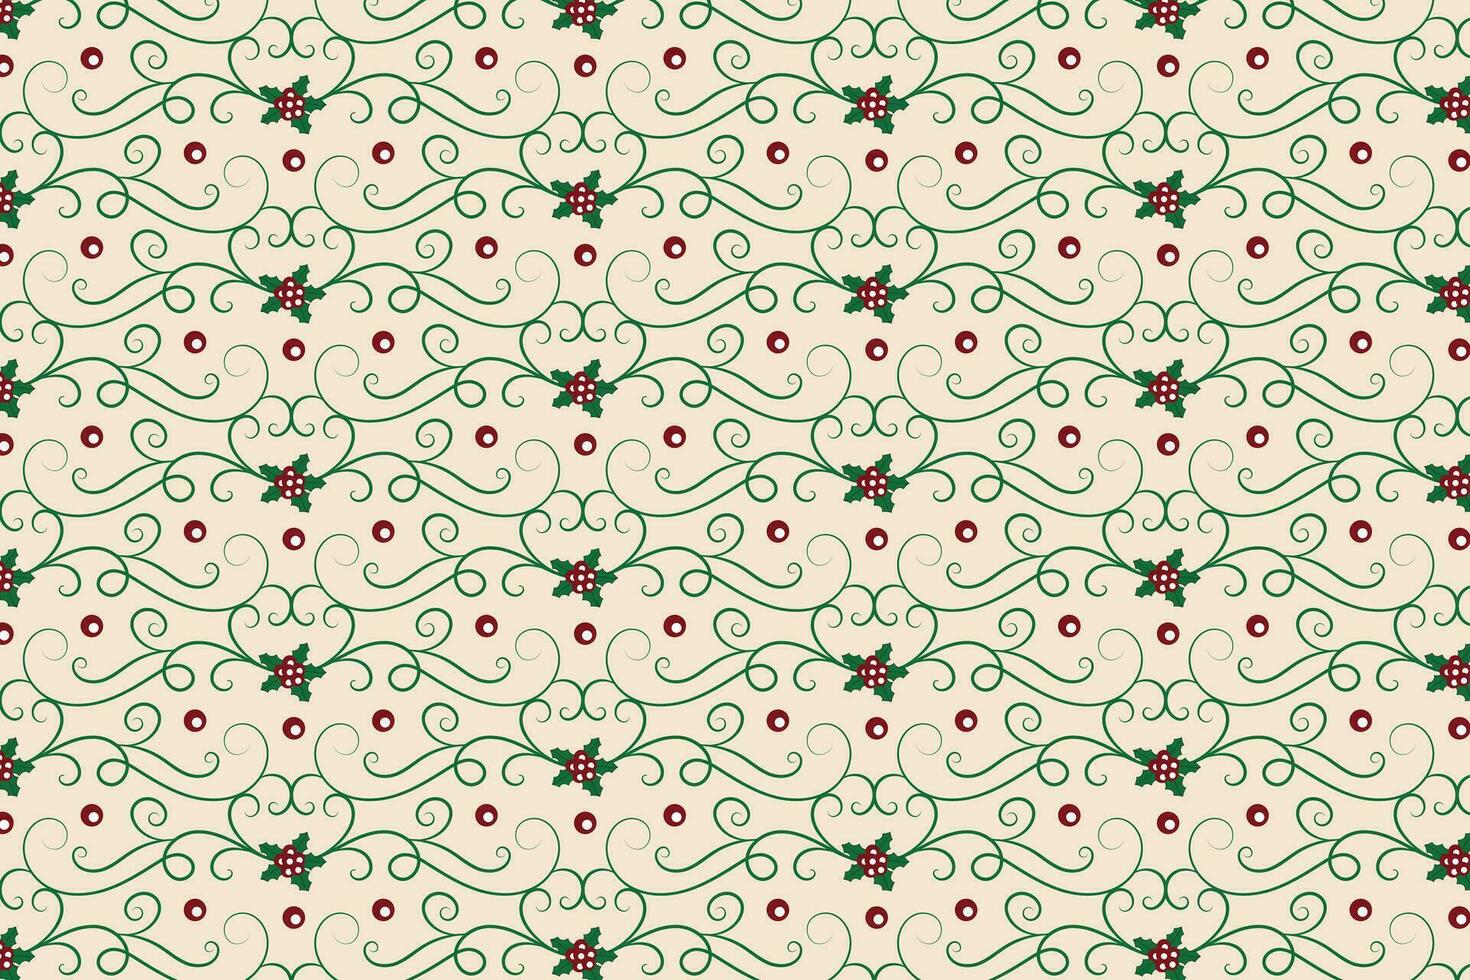 Christmas flourishes swirls holly leaves Seamless Pattern, winter vibes berry leaf modern Christmas pattern, holiday green ornate Christmas pattern, wrapping paper holiday holly printing fabric vector